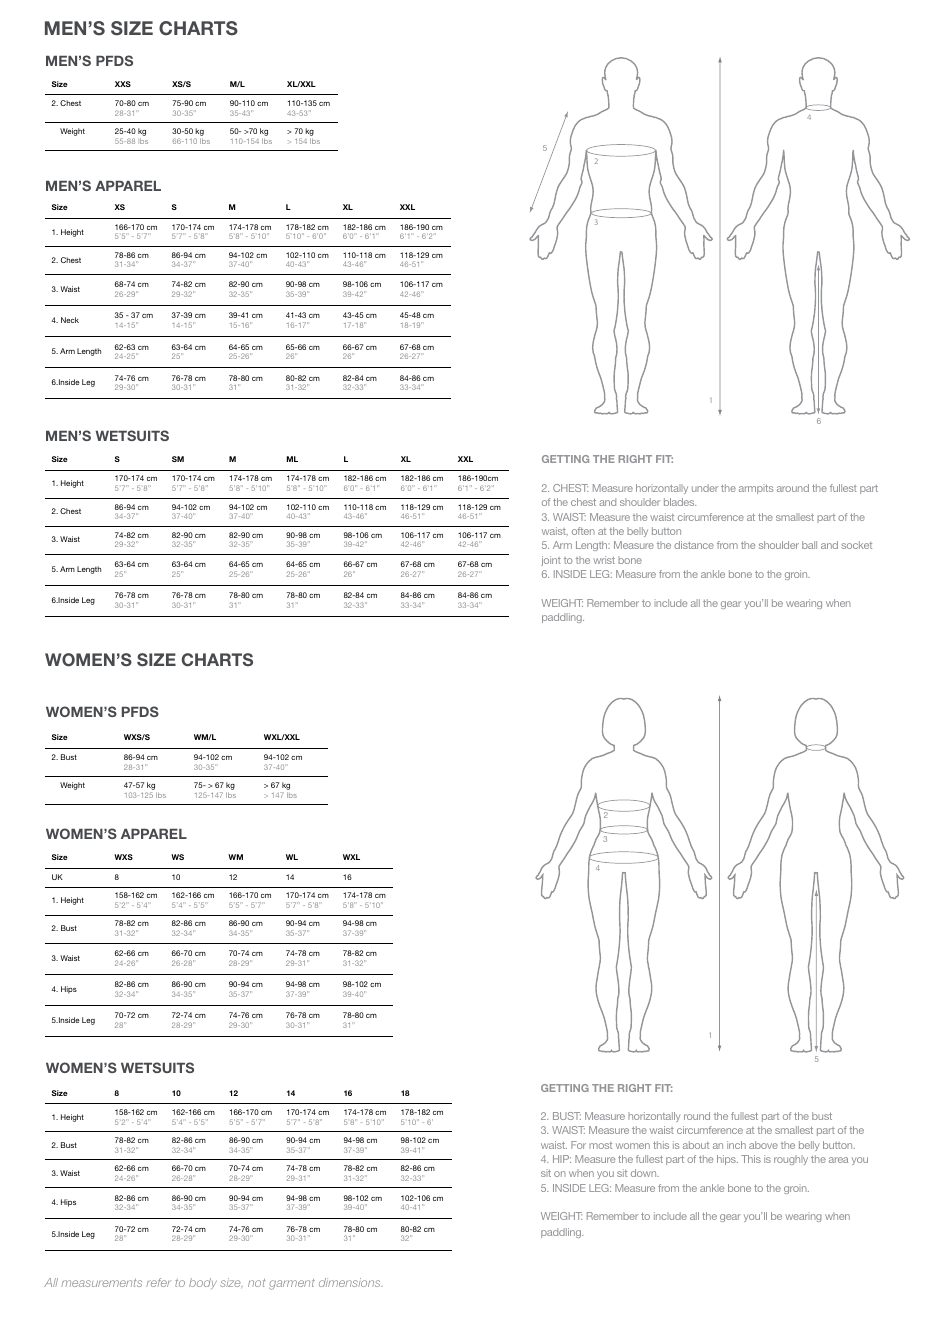 Wetsuit and Pfd Size Charts, Page 1